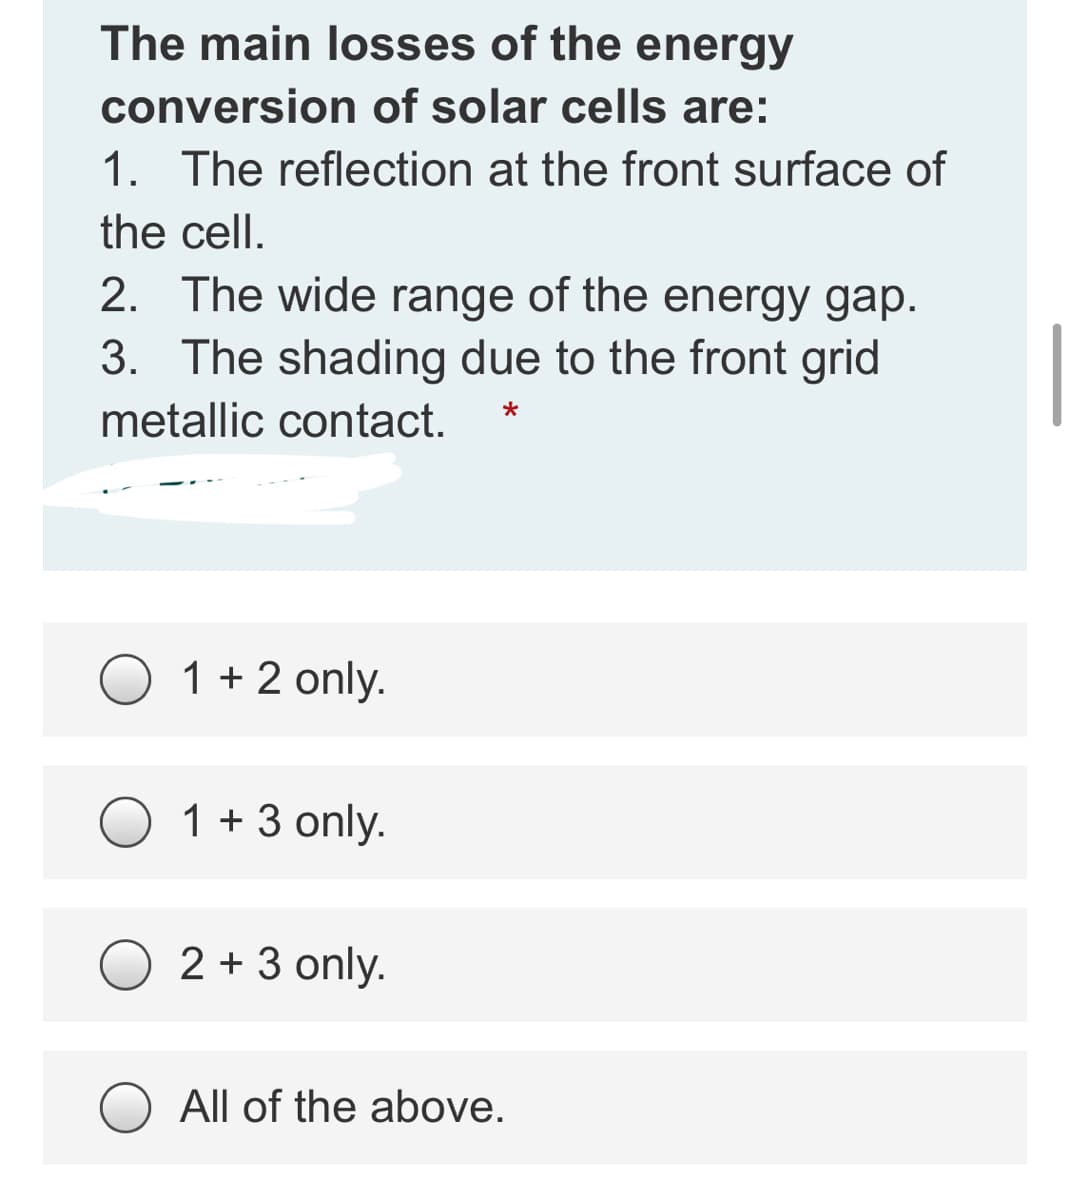 The main losses of the energy
conversion of solar cells are:
1. The reflection at the front surface of
the cell.
2. The wide range of the energy gap.
3. The shading due to the front grid
metallic contact.
*
1 + 2 only.
1 + 3 only.
2 + 3 only.
All of the above.
